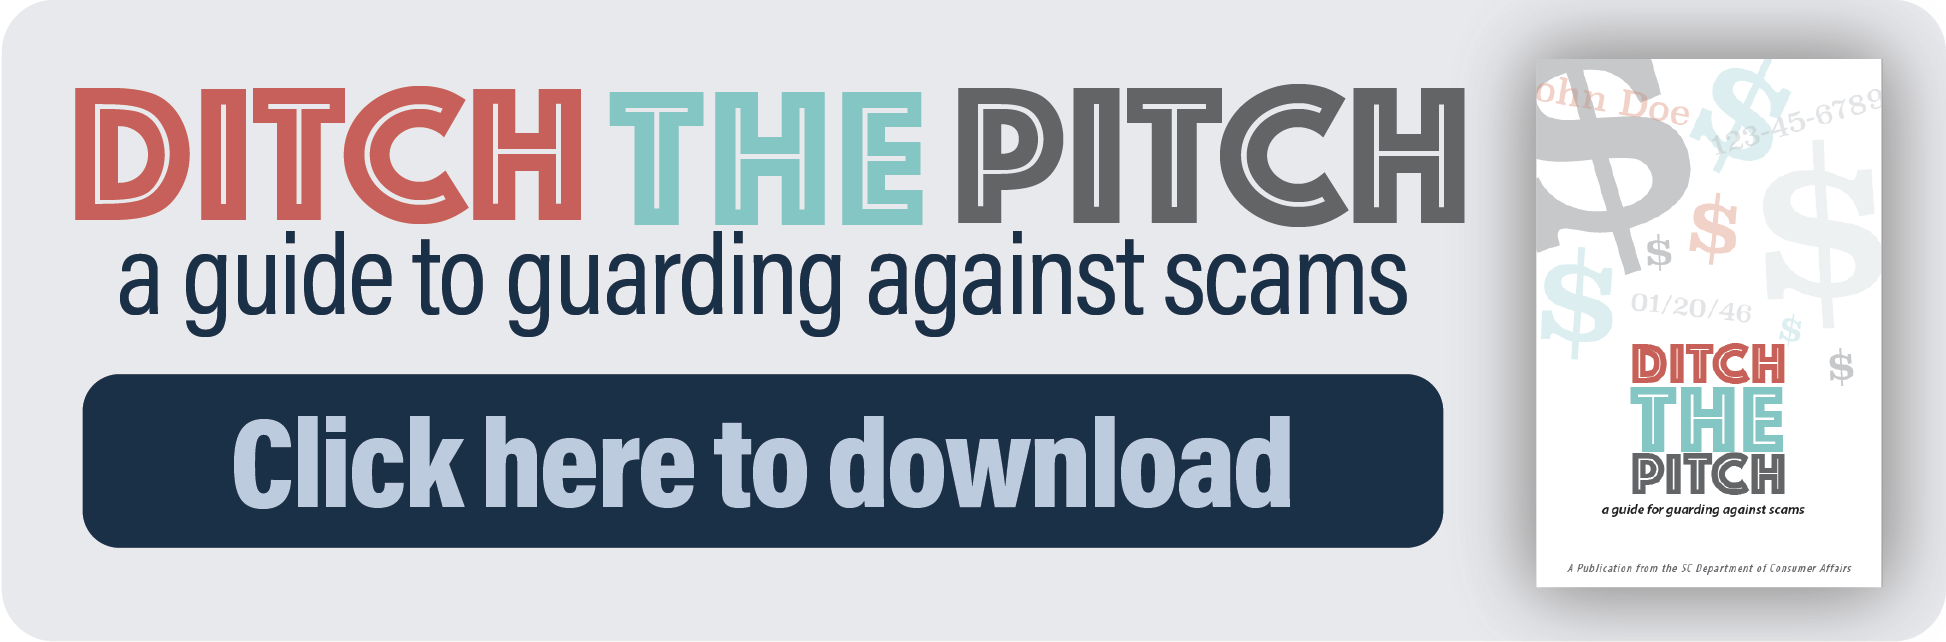 Download Ditch the Pitch